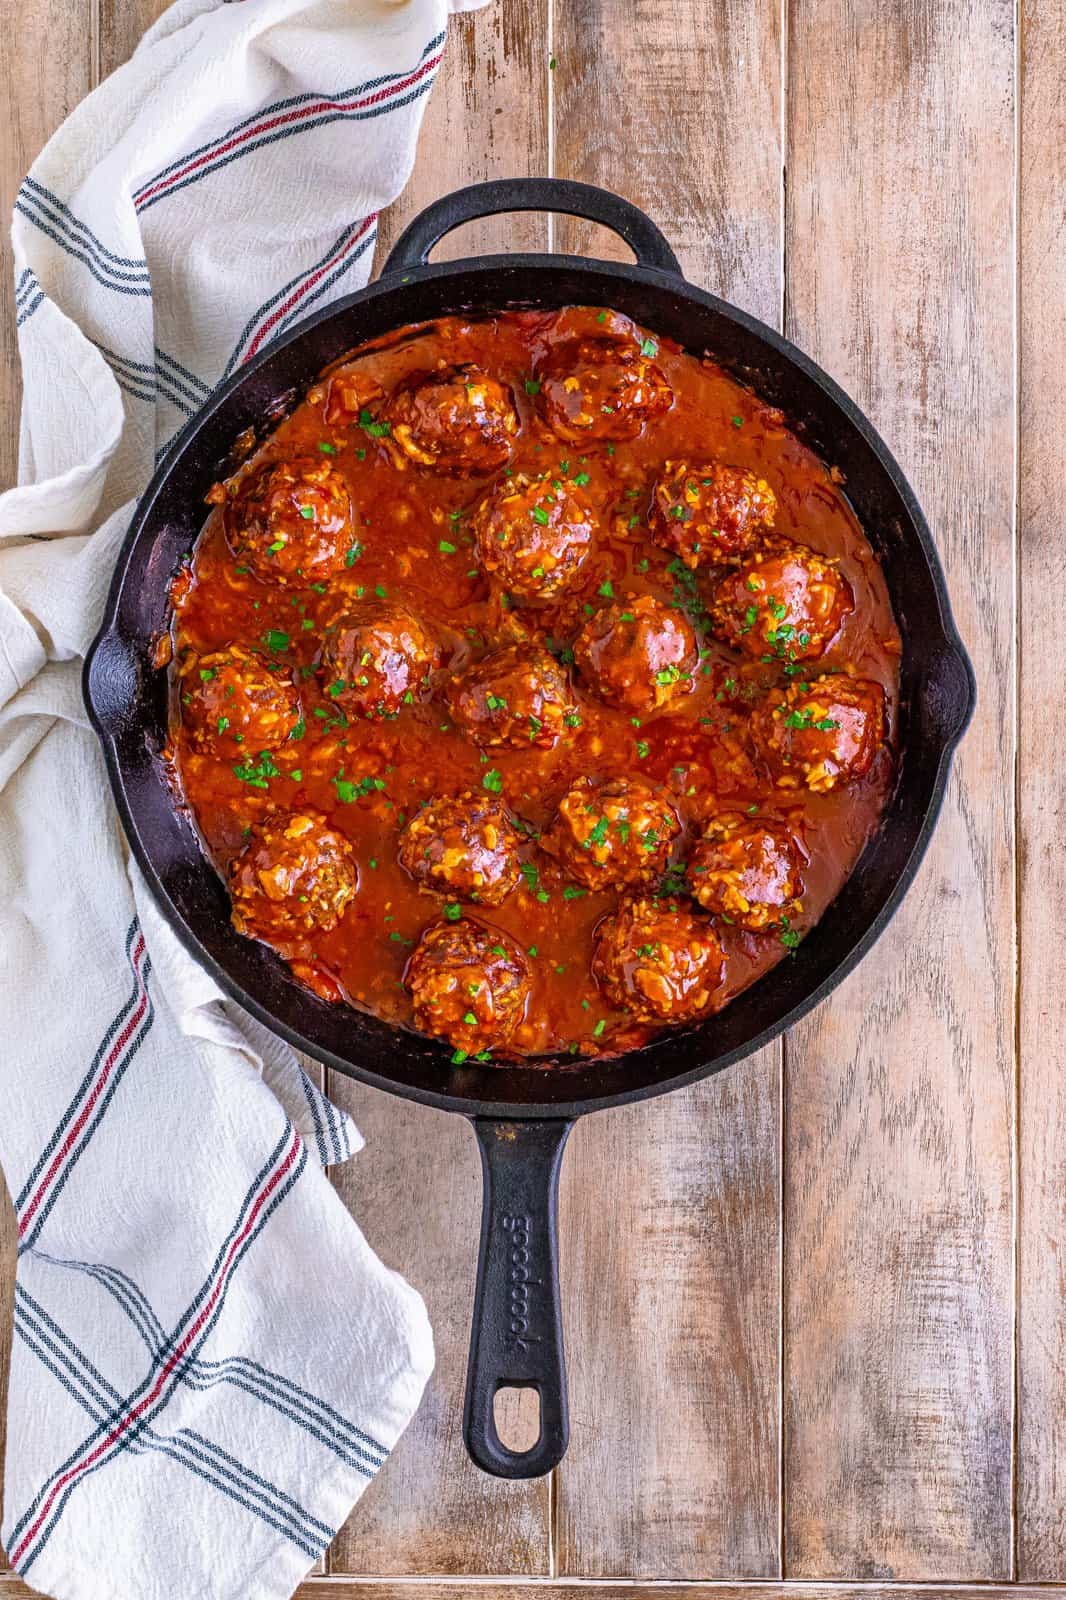 Looking down on Porcupine Meatballs with sauce in a cast iron skillet. 